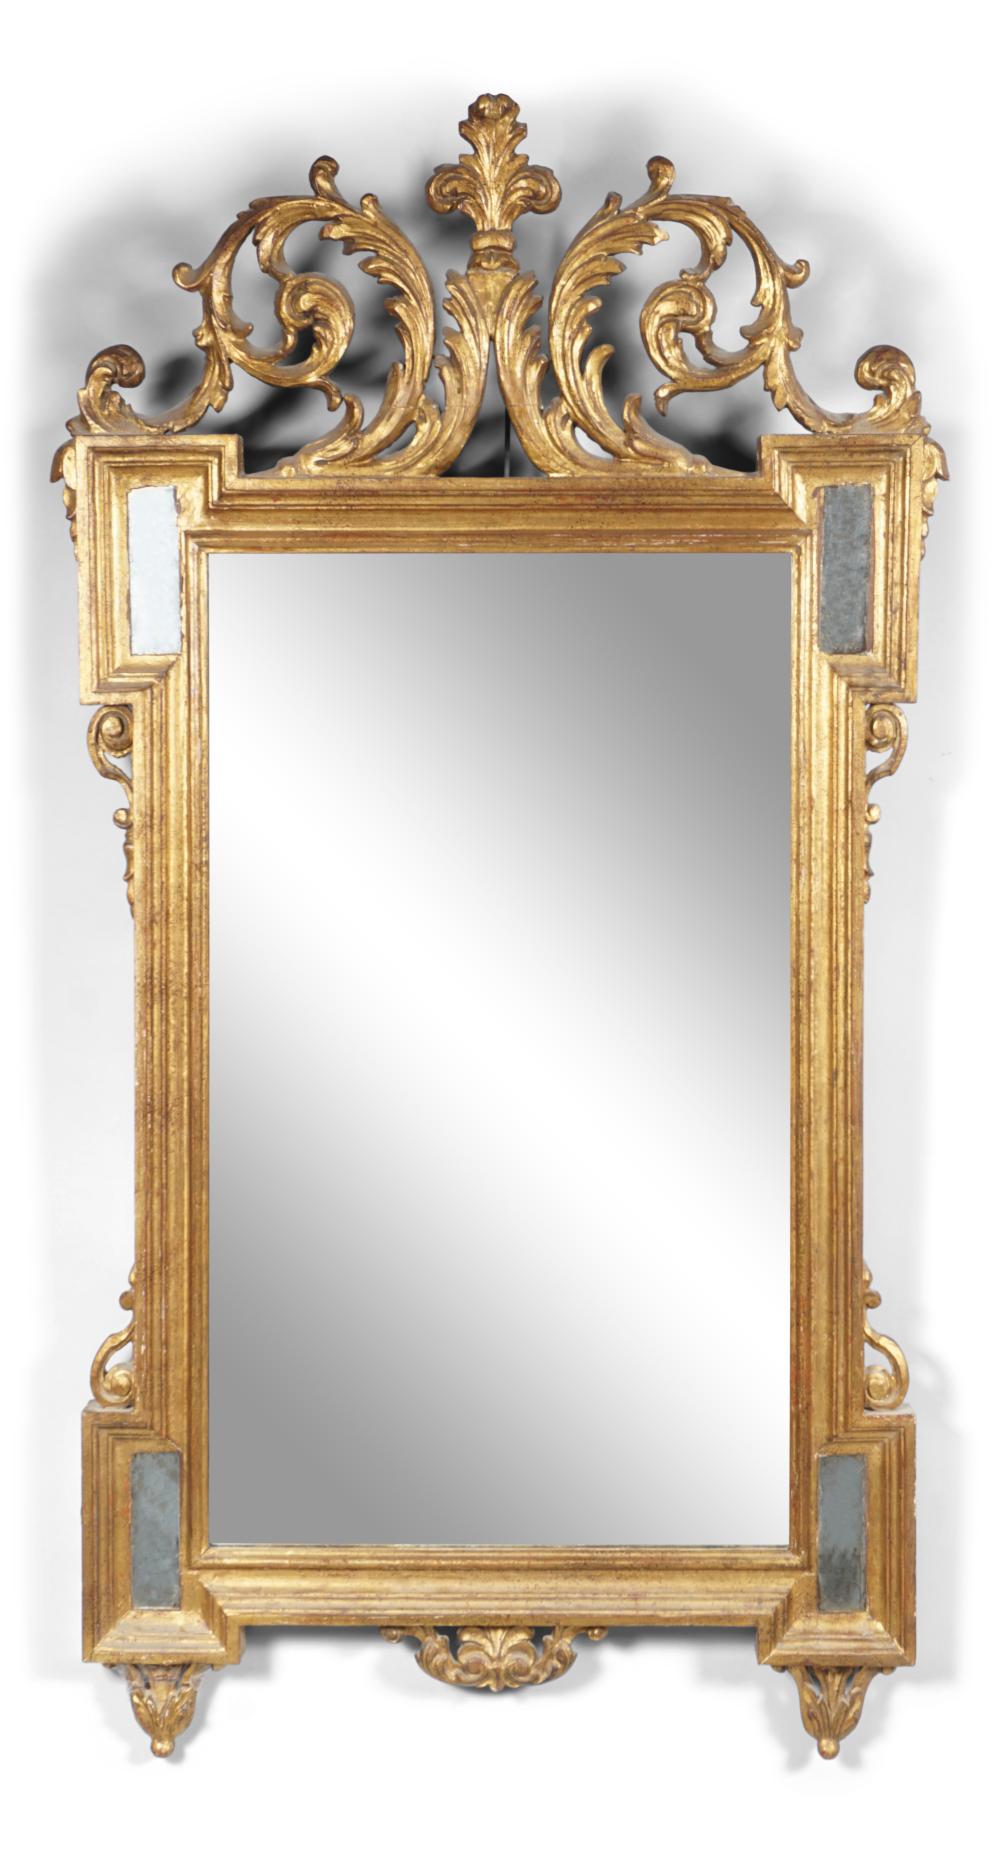 CLASSICAL STYLE GILTWOOD MIRROR 33dbe1